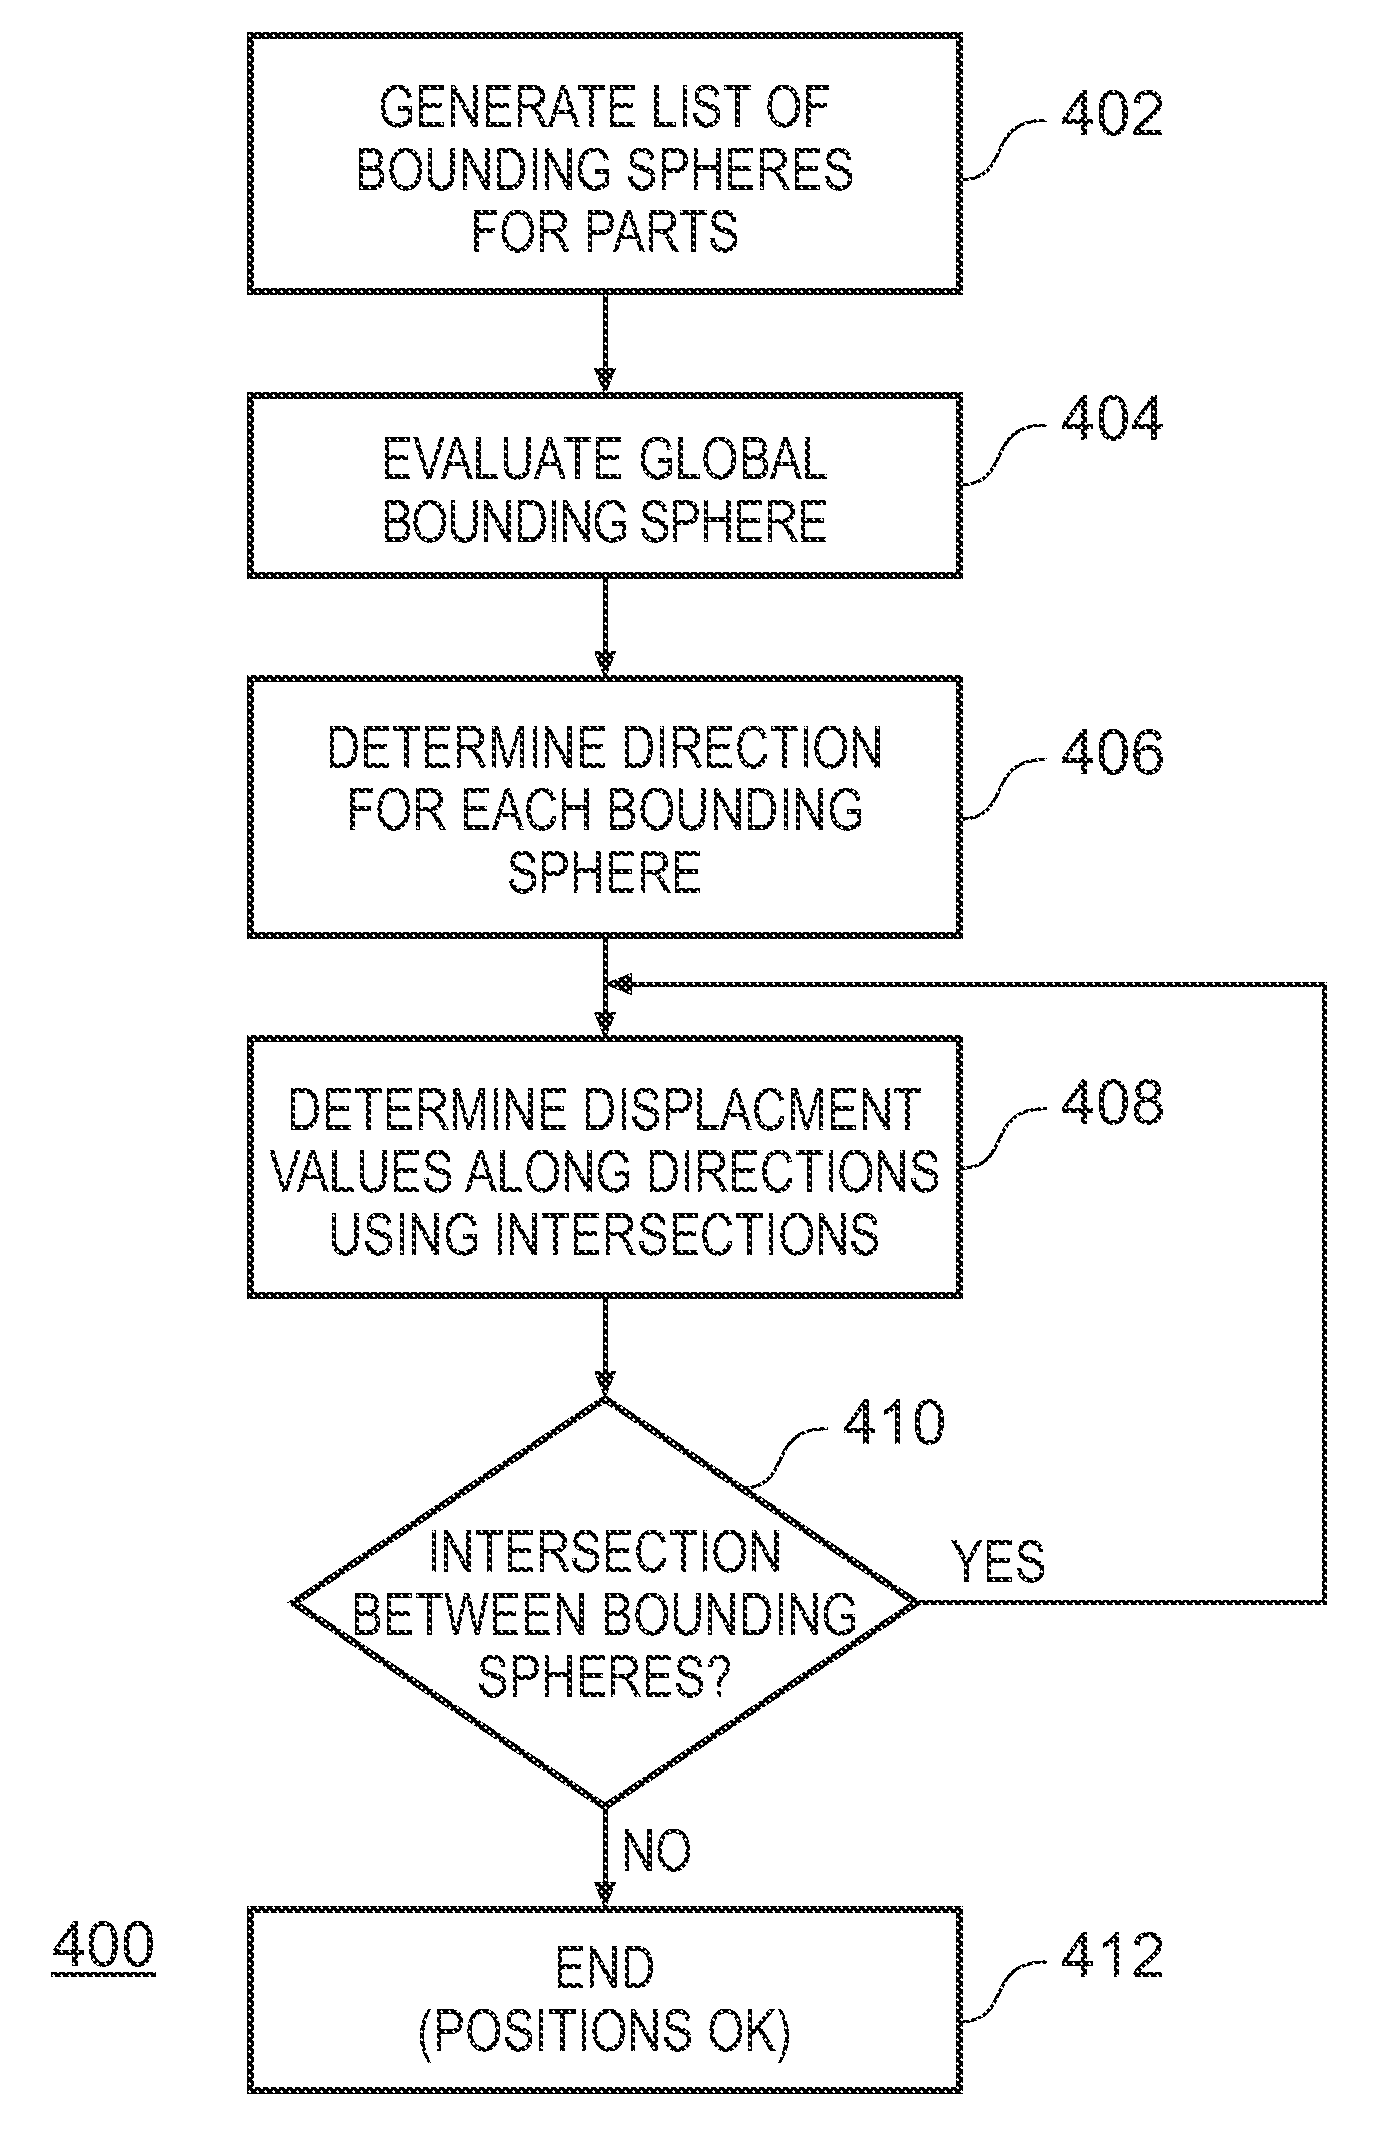 Computer system and method for providing exploded views of an assembly